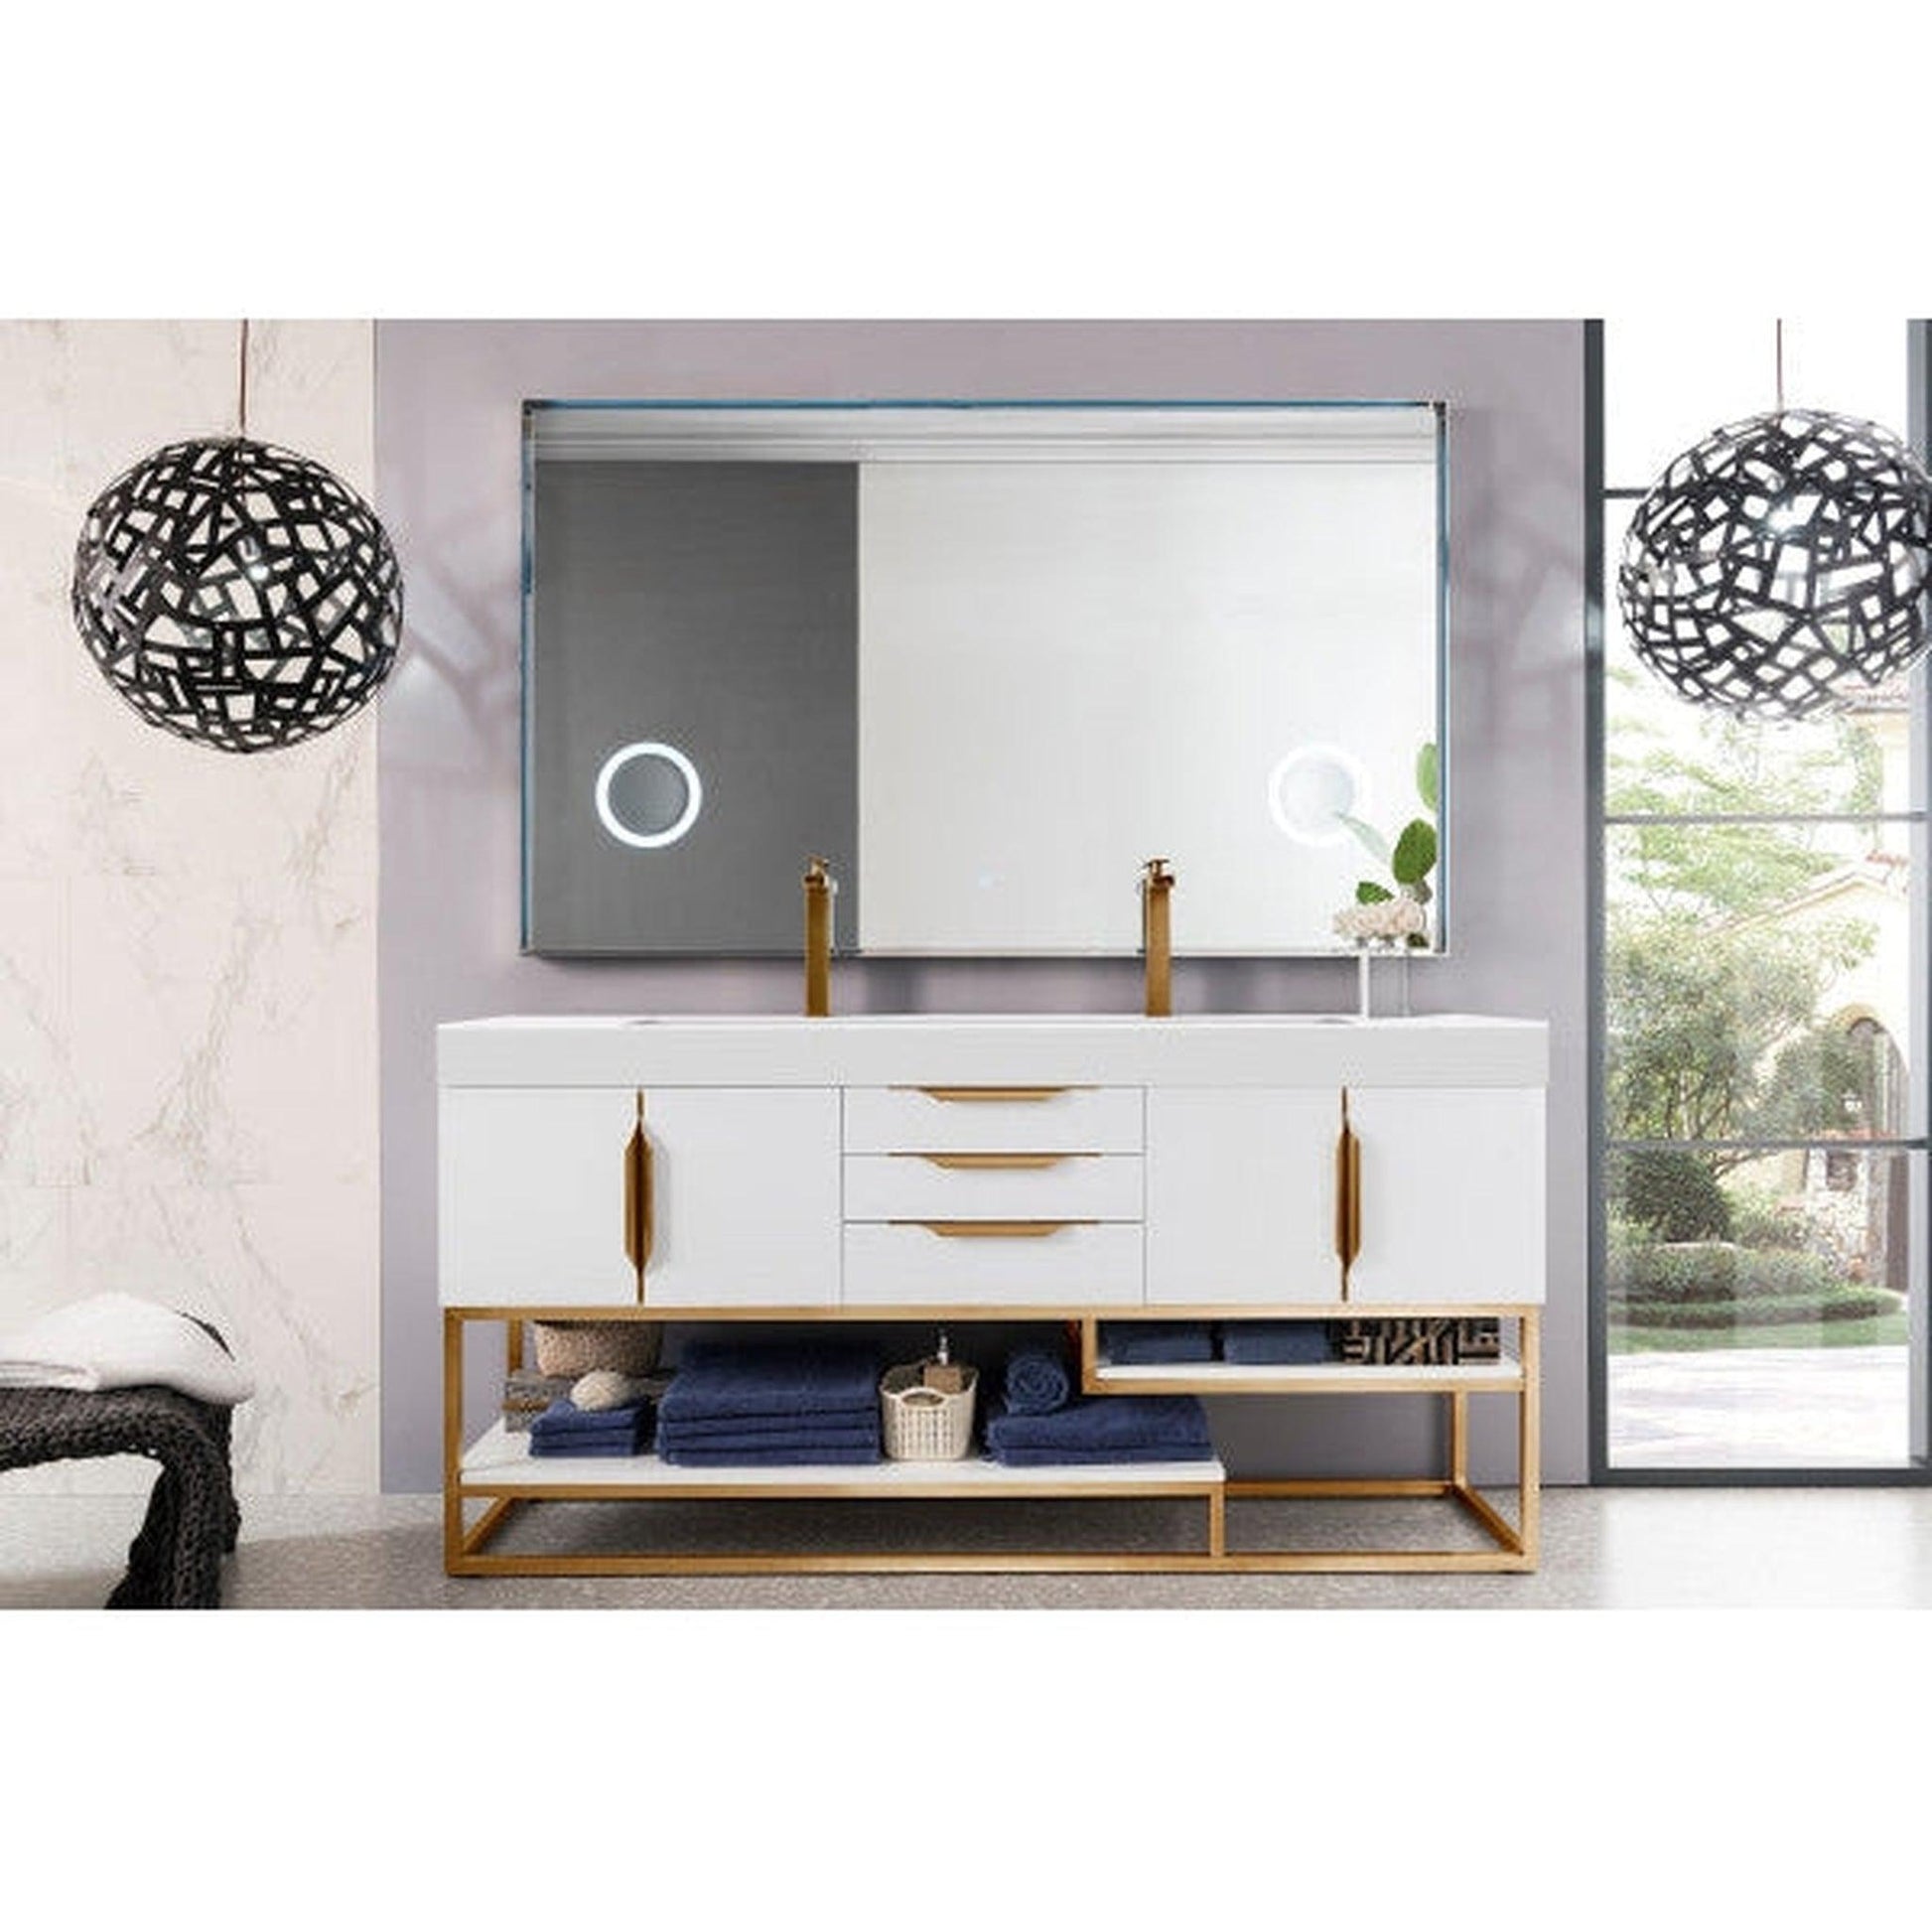 James Martin Columbia 73" Double Glossy White Bathroom Vanity With Radiant Gold Hardware and 6" Glossy White Composite Countertop